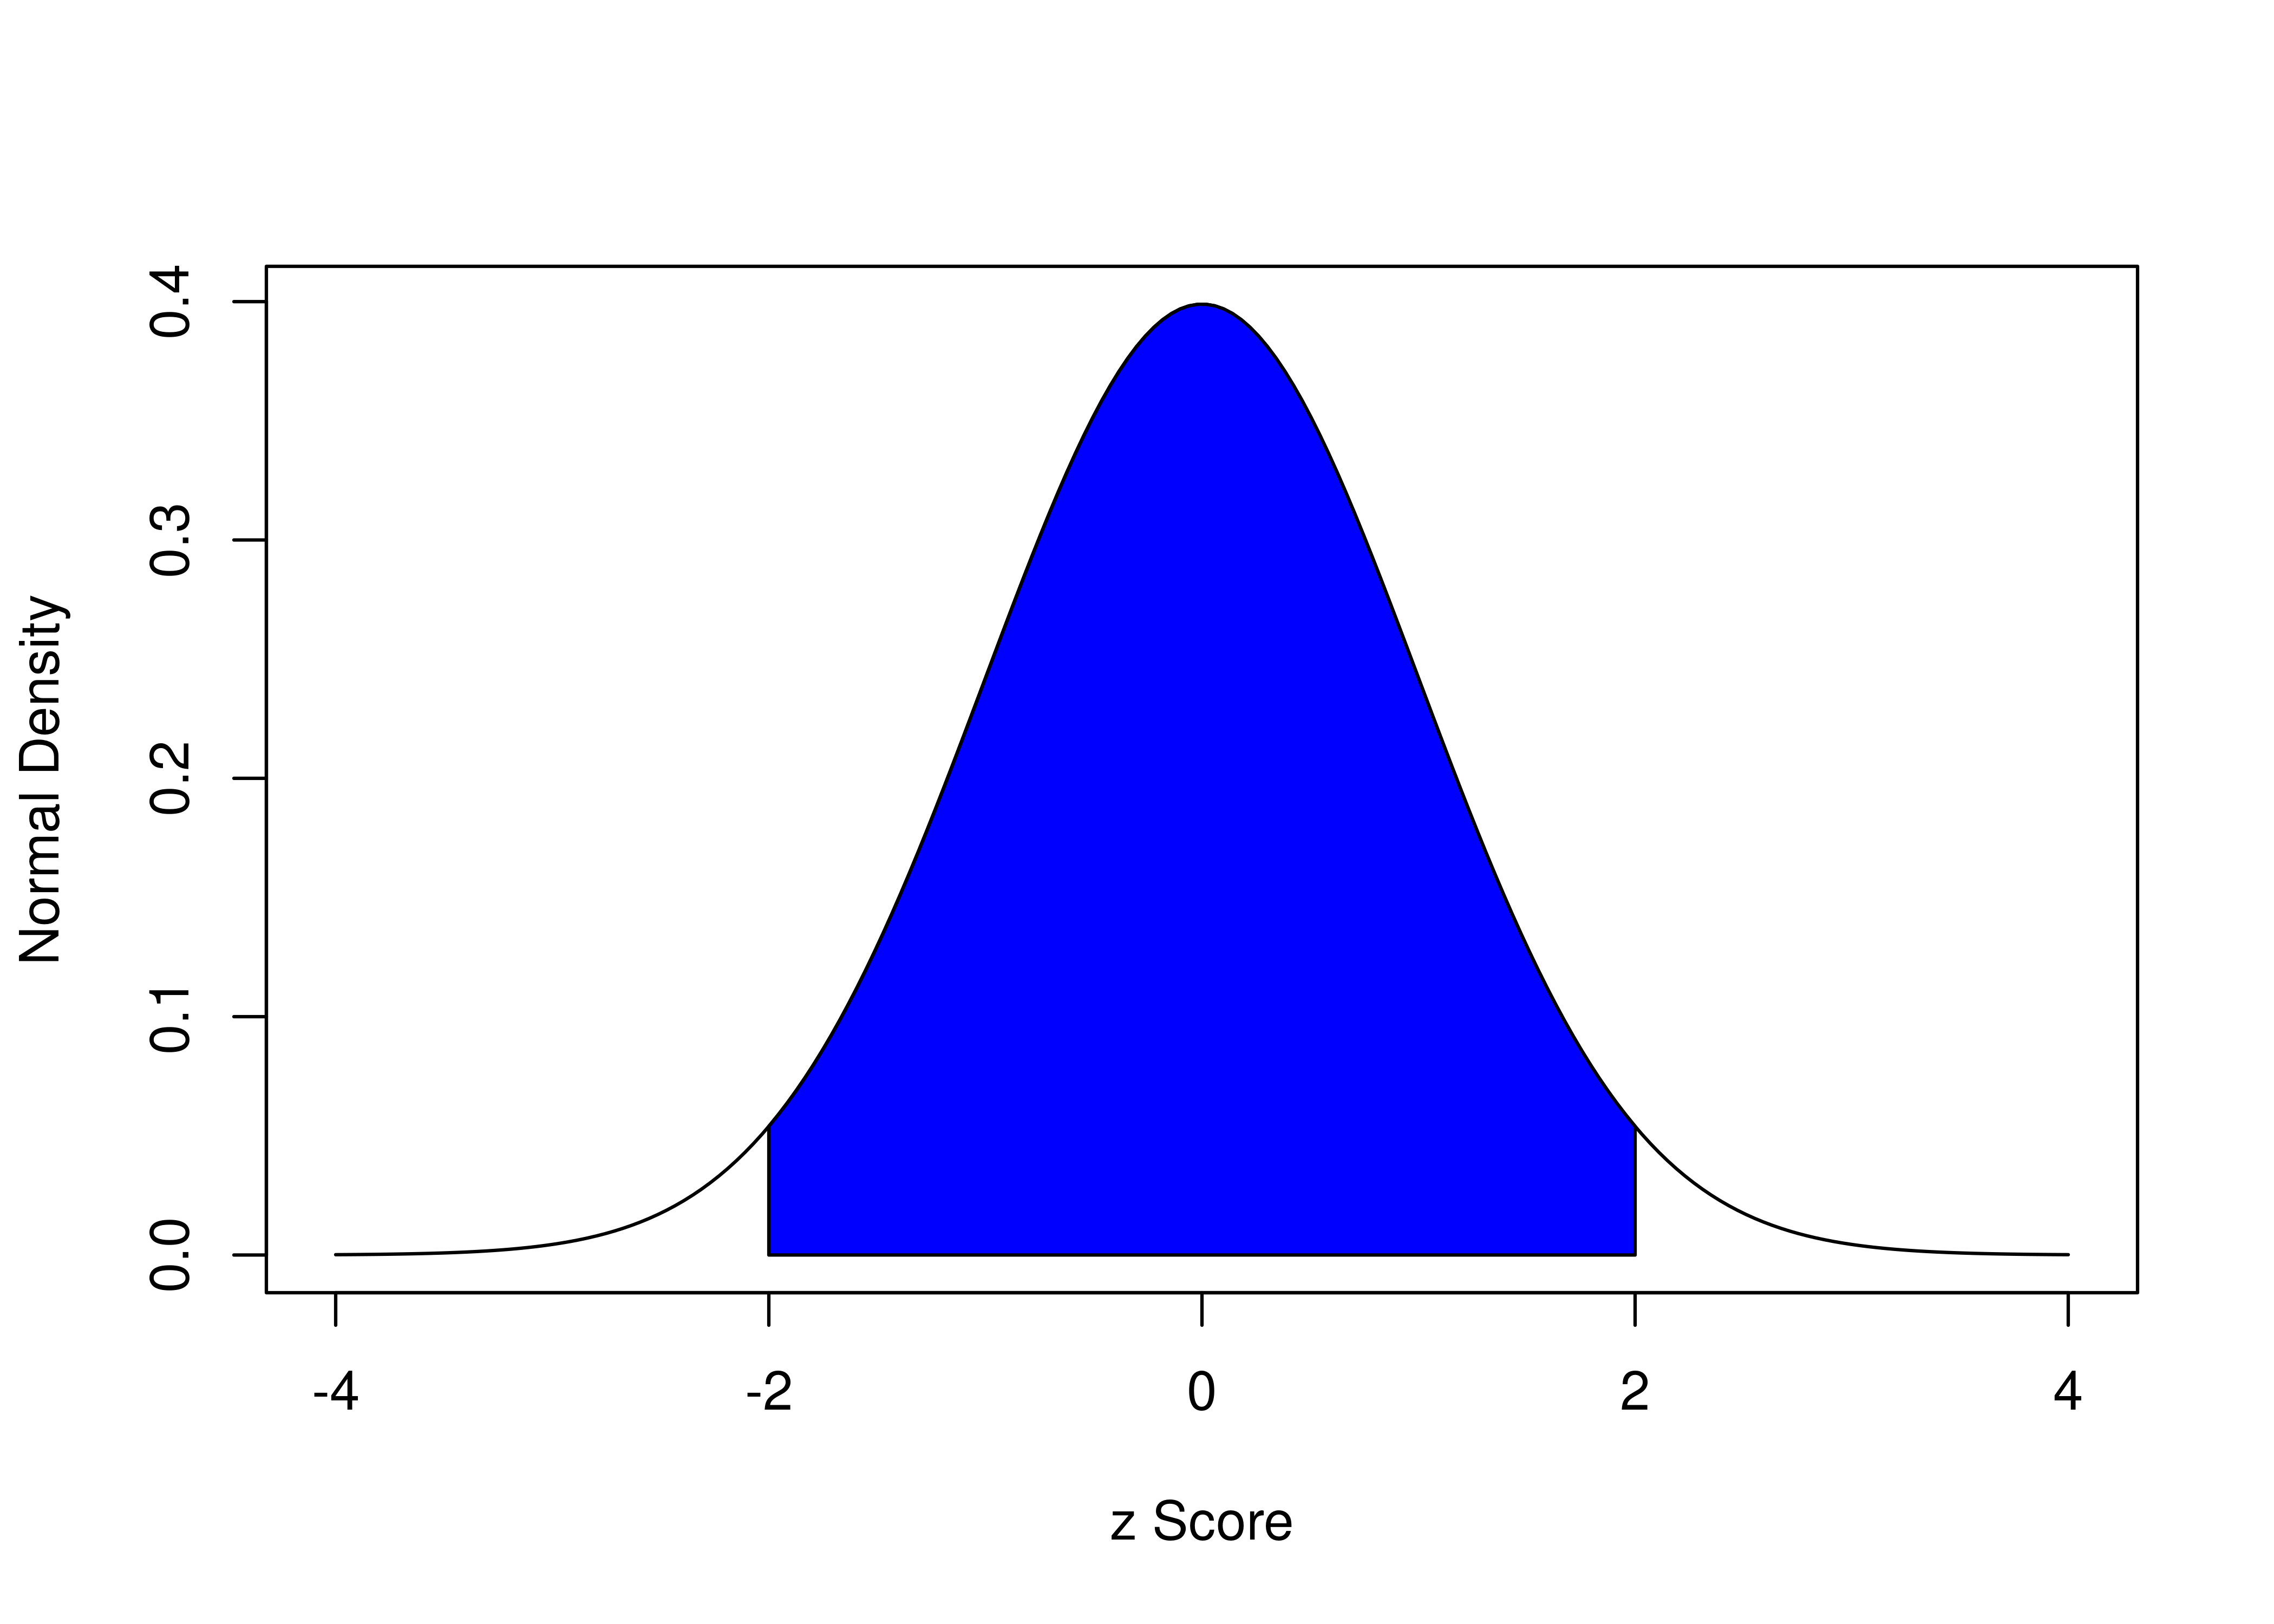 Density of Standard Normal Distribution. The blue region represents the area within two standard deviations of the mean.